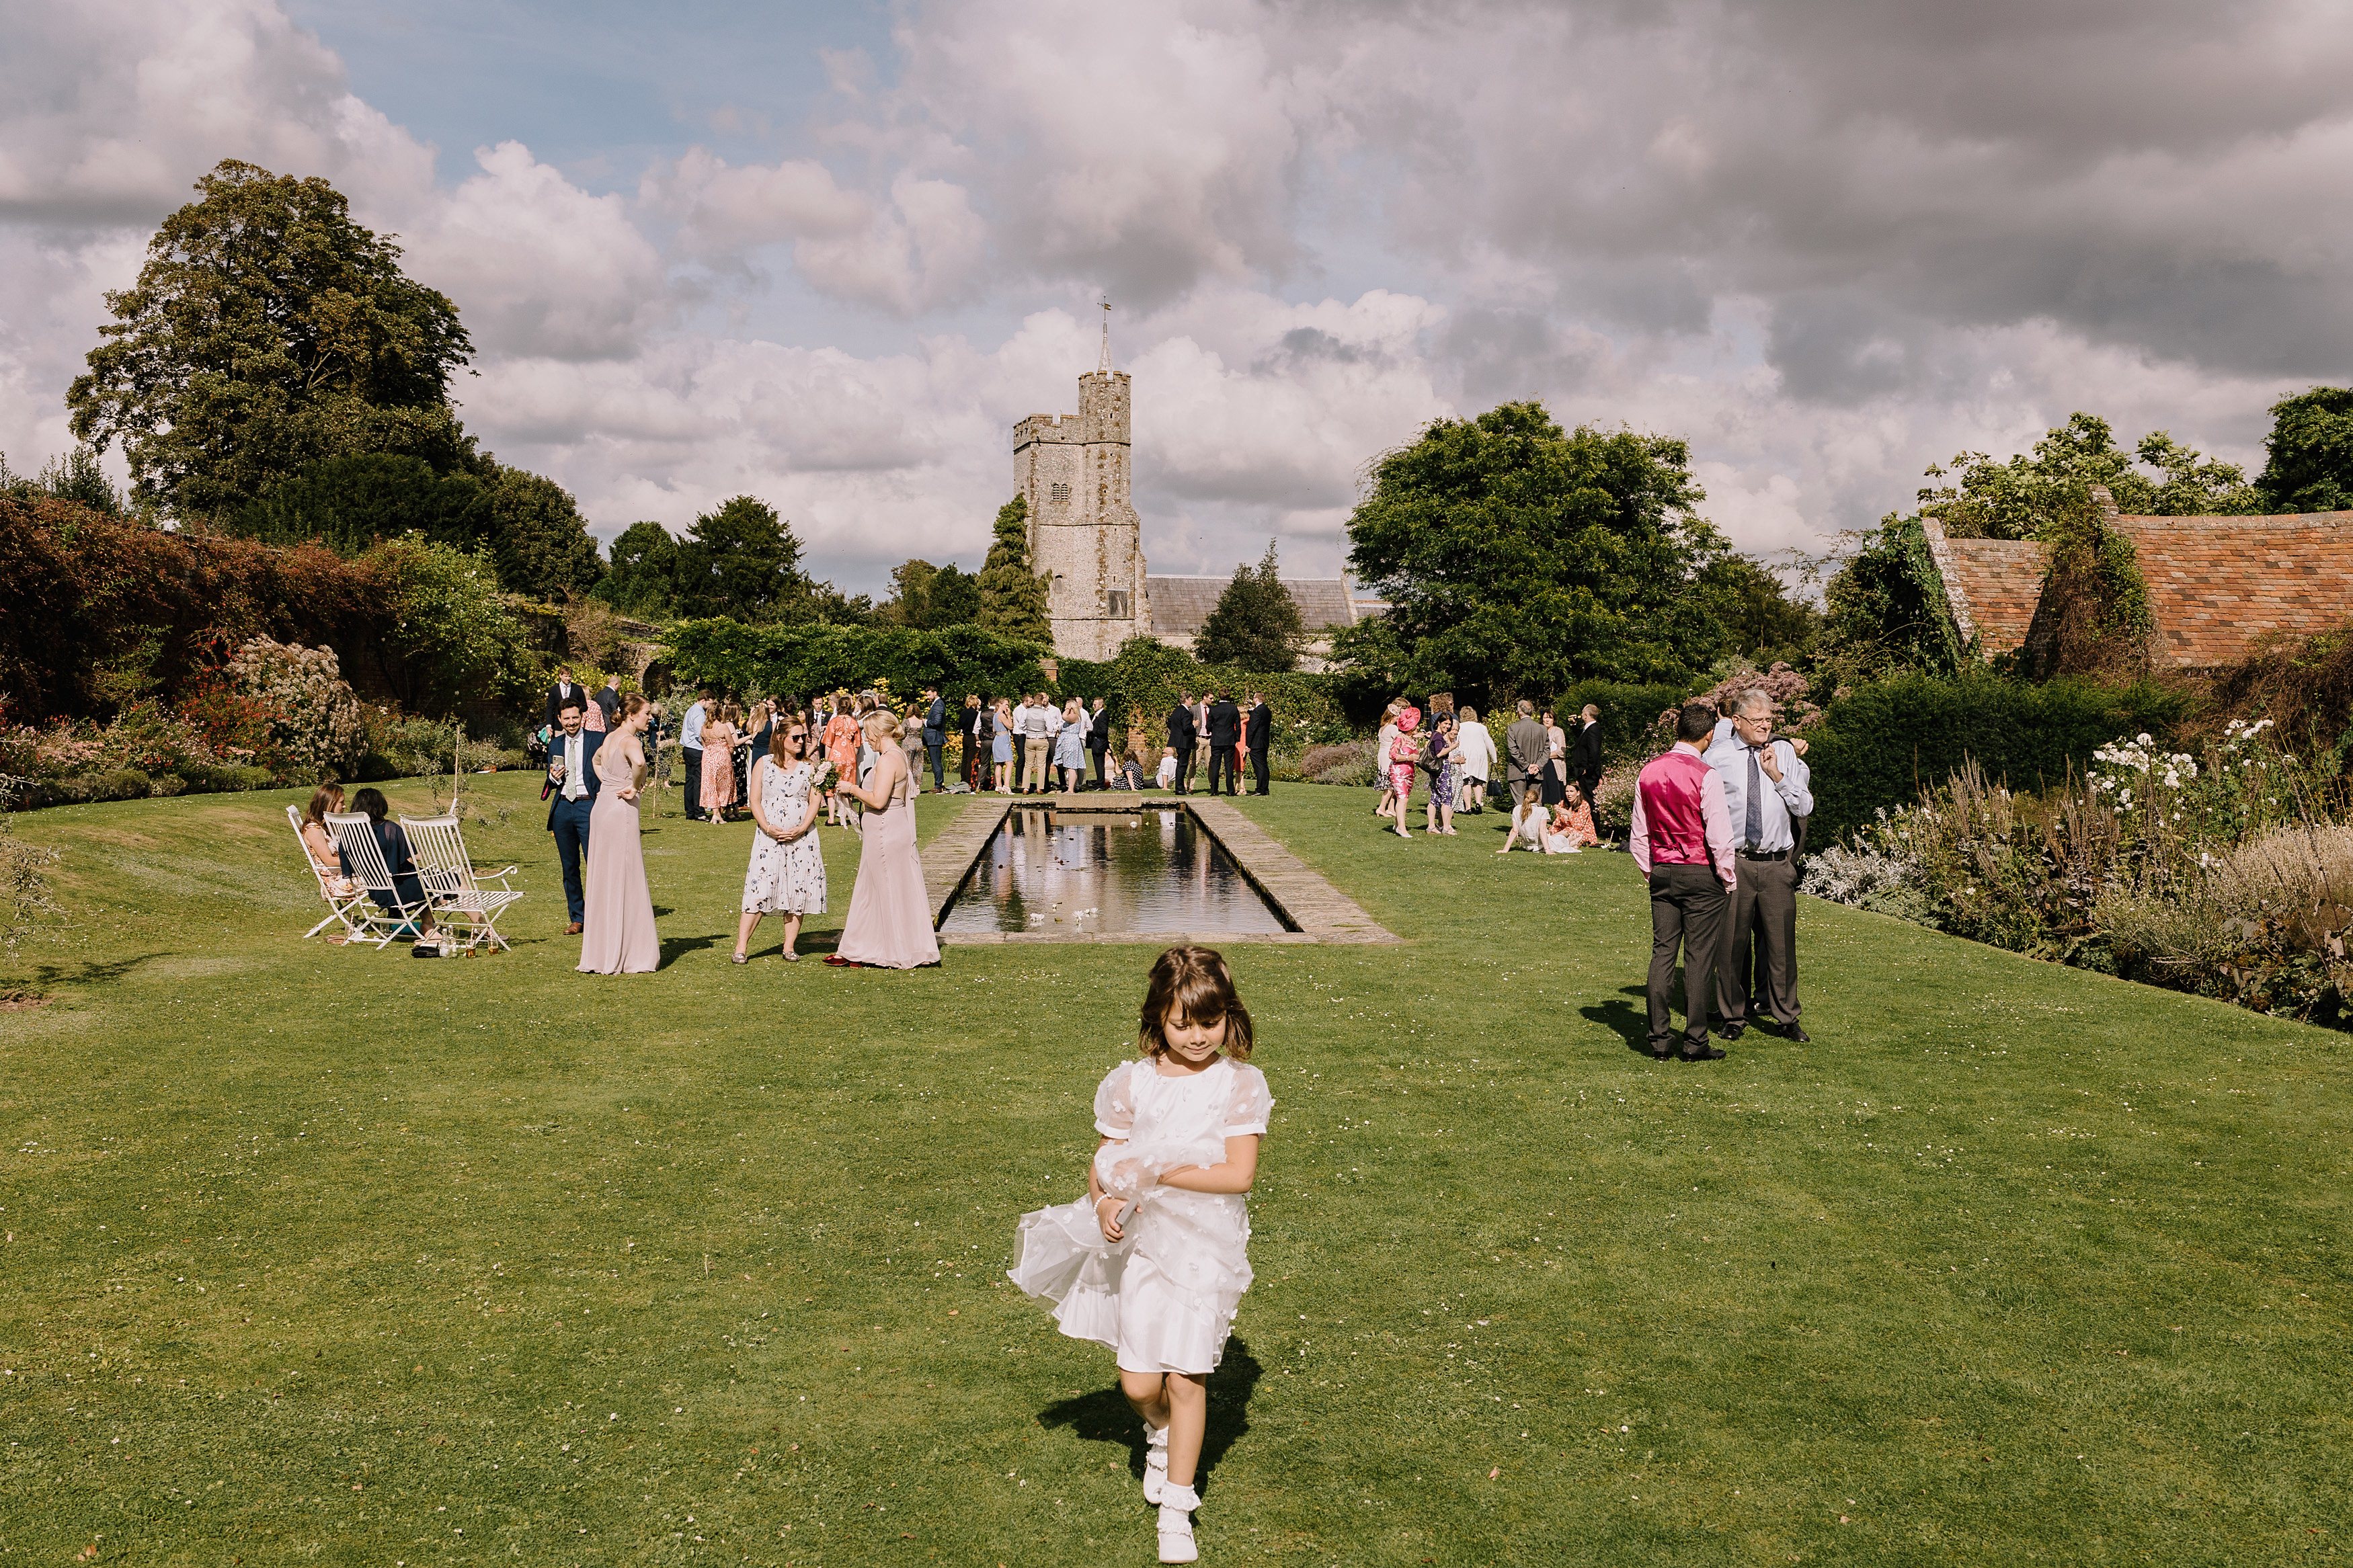 A photo of all the wedding guests with flower girl in the foreground and the Church of Holy Cross in the background